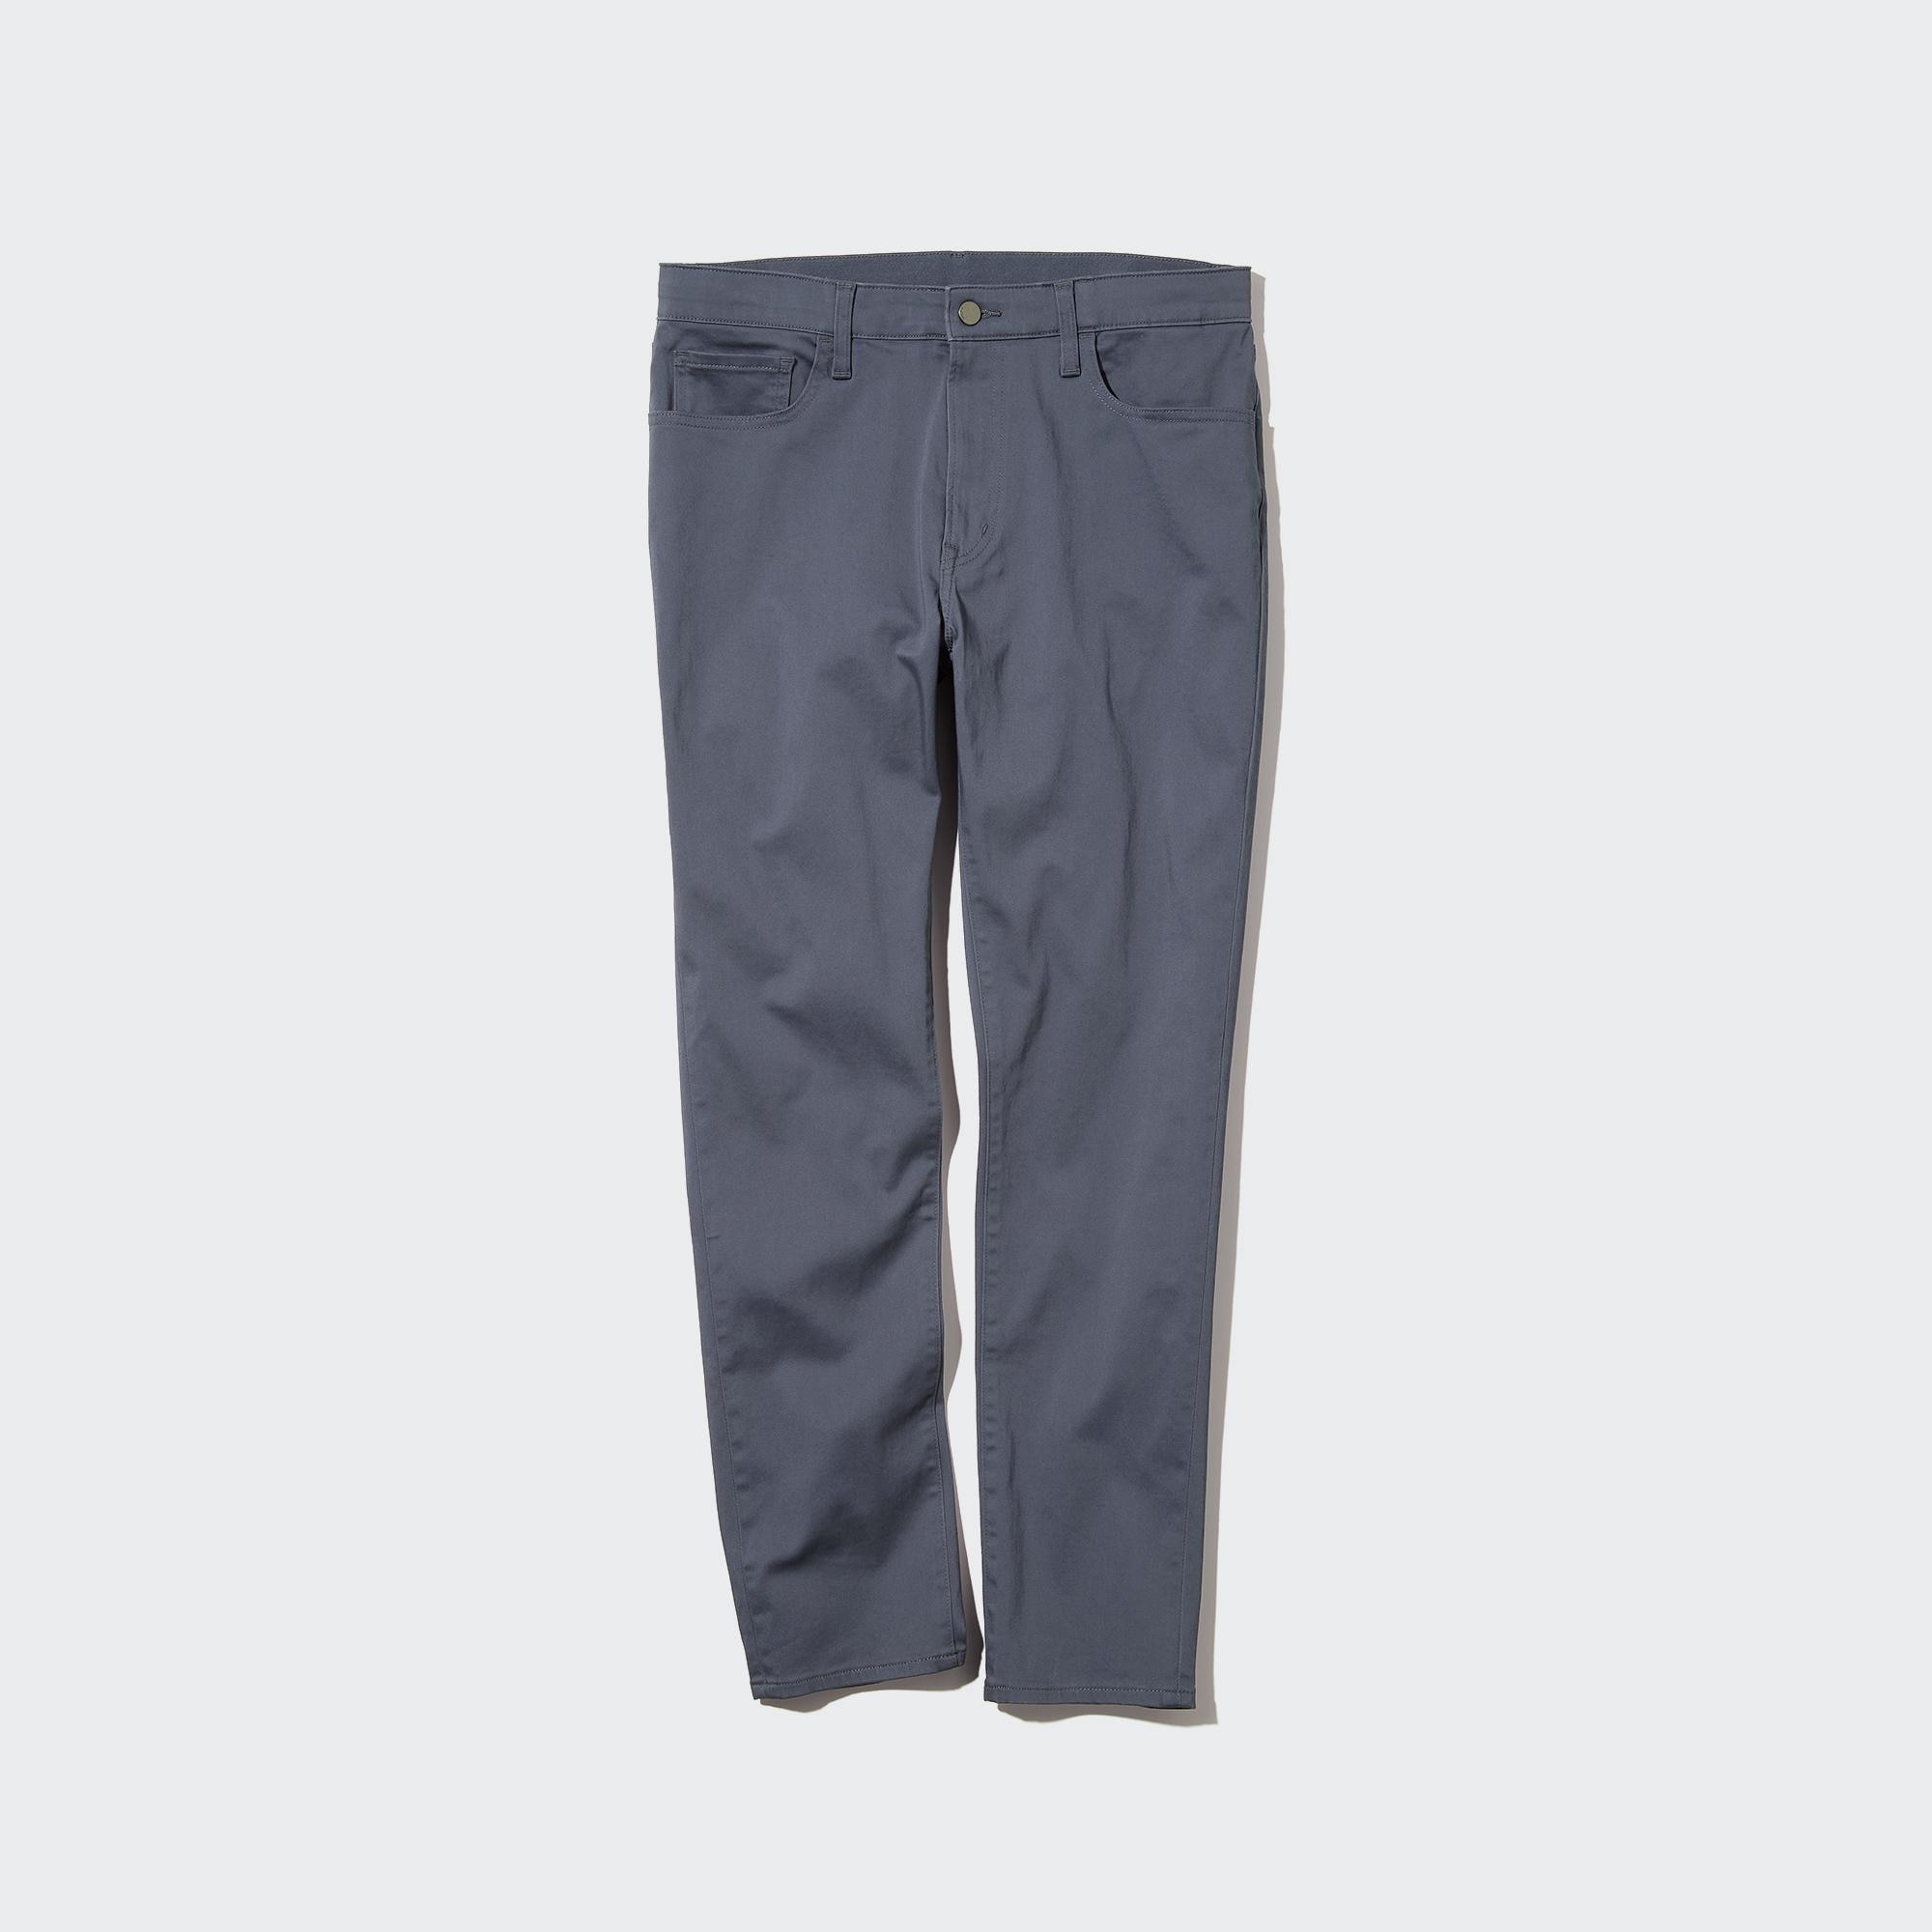 UNIQLO Ultra Stretch Skinny-Fit Color Jeans (Tall)